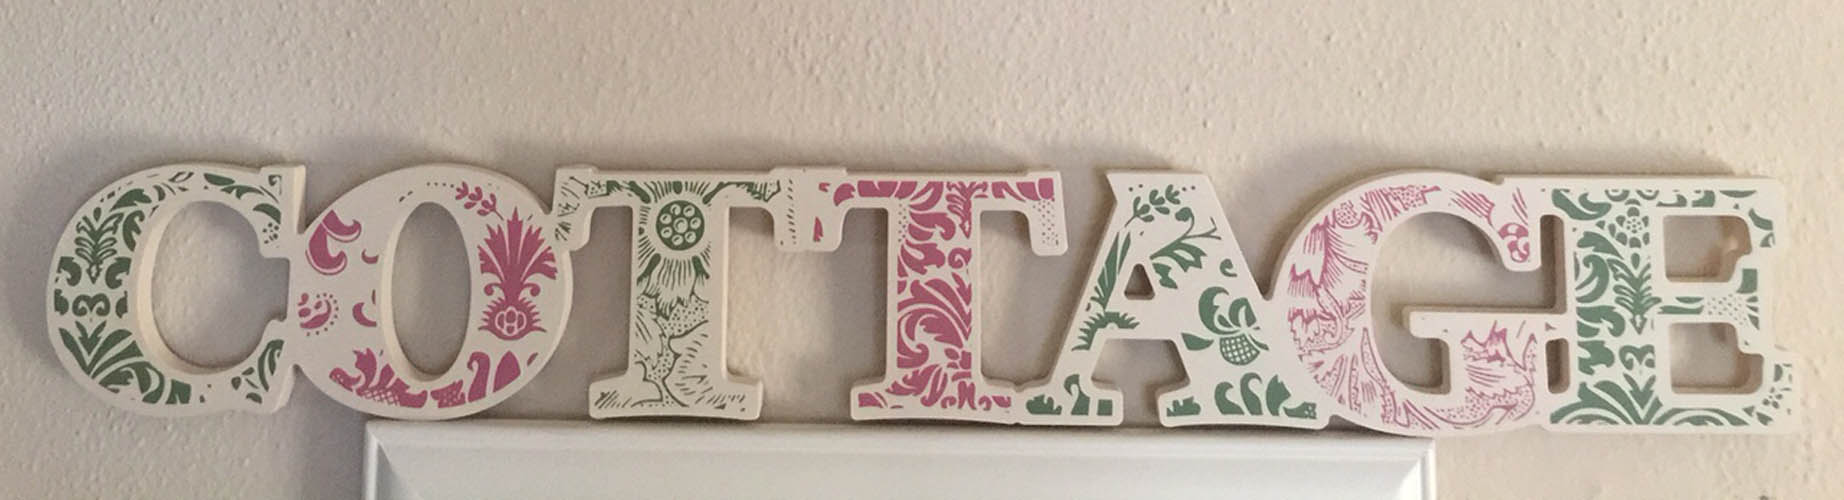 Cottage Chic Letters Sign